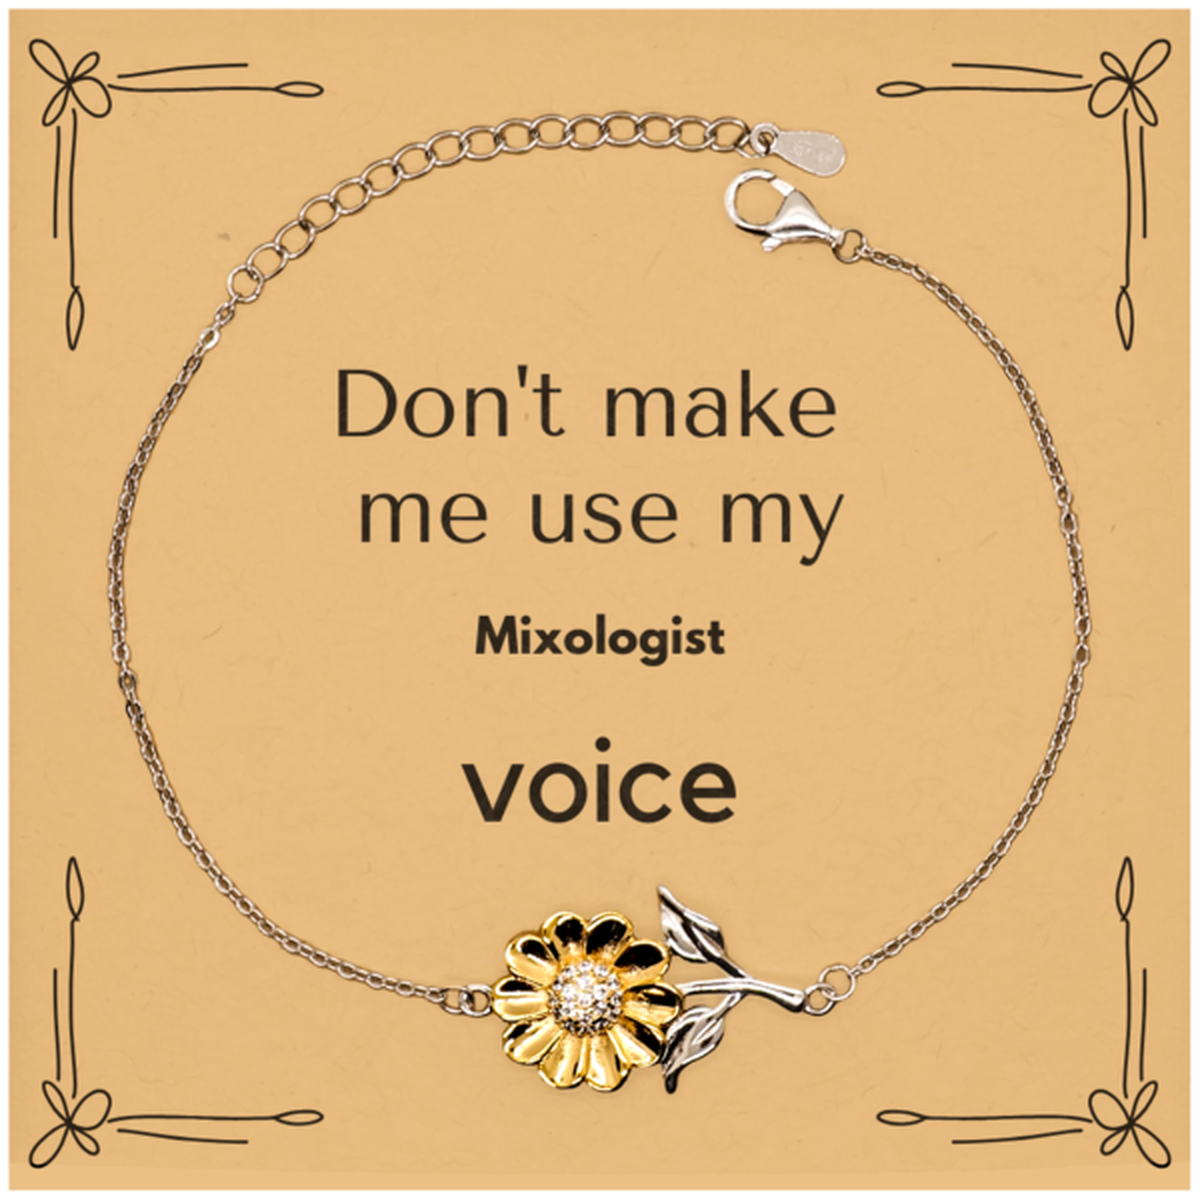 Don't make me use my Mixologist voice, Sarcasm Mixologist Card Gifts, Christmas Mixologist Sunflower Bracelet Birthday Unique Gifts For Mixologist Coworkers, Men, Women, Colleague, Friends